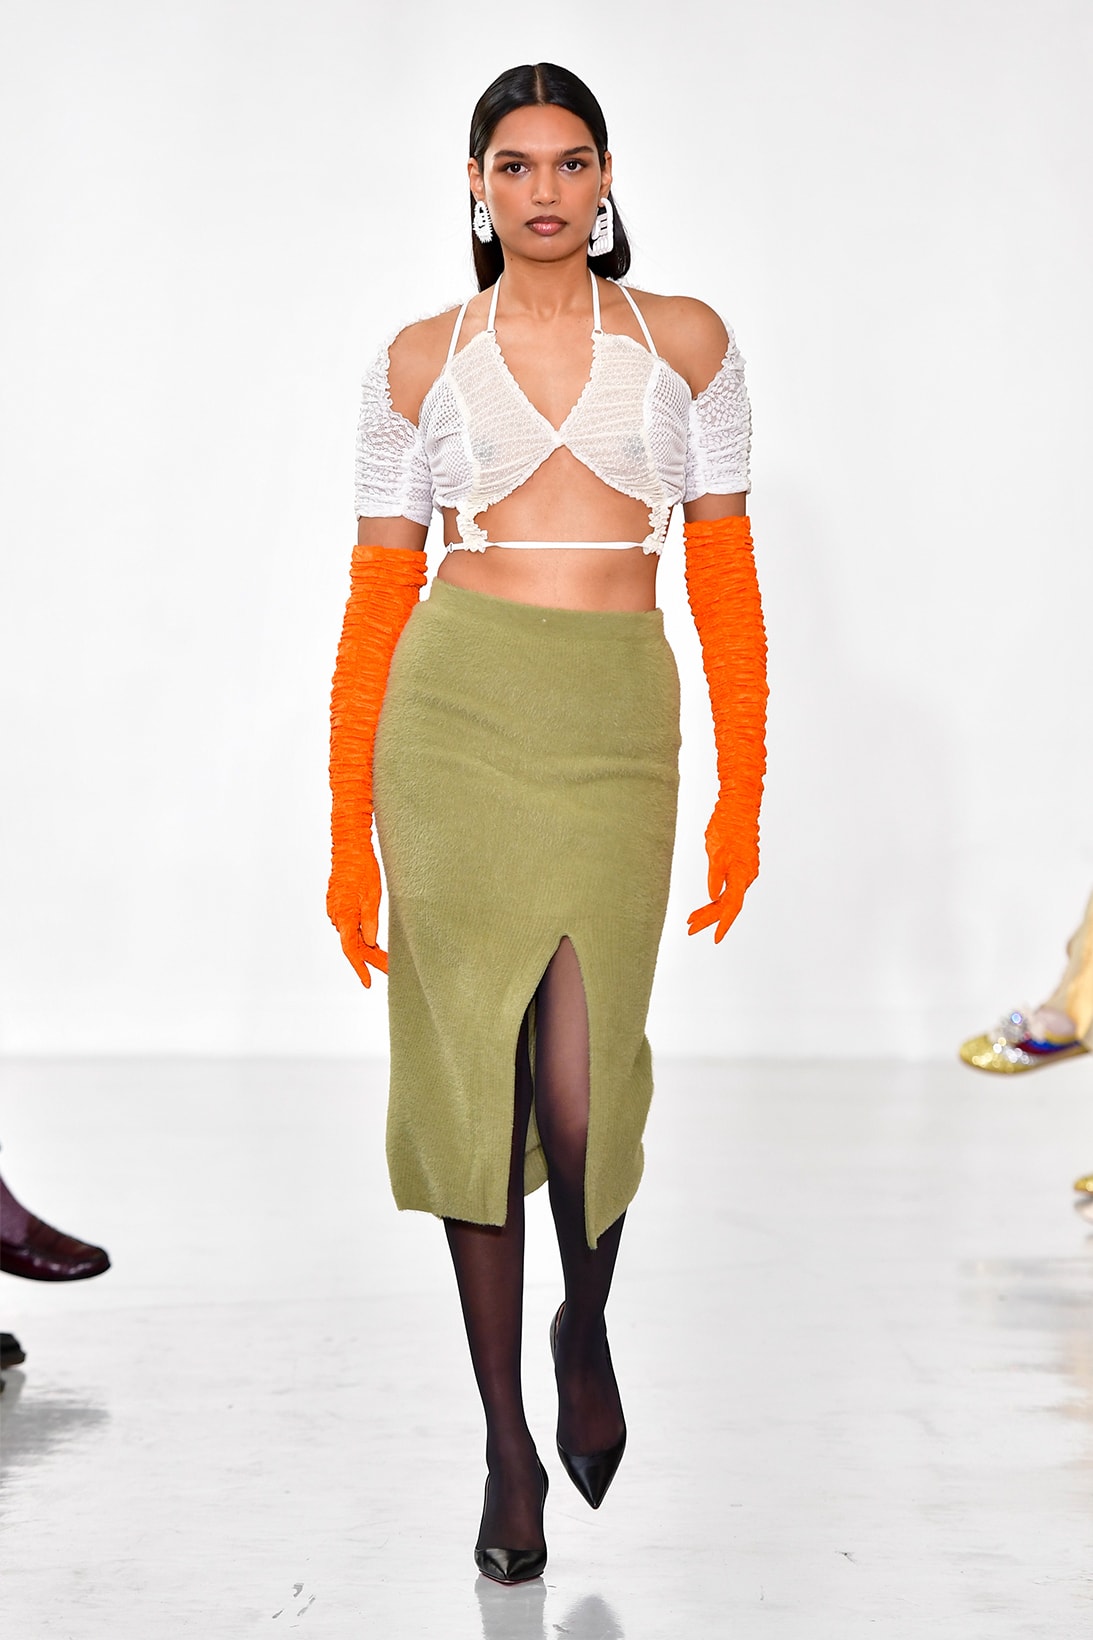 Ester Manas Fall Winter Collection Size Inclusivity Cut-Outs Fashion Week Runway Show Photos Bustier Top Skirt White Green